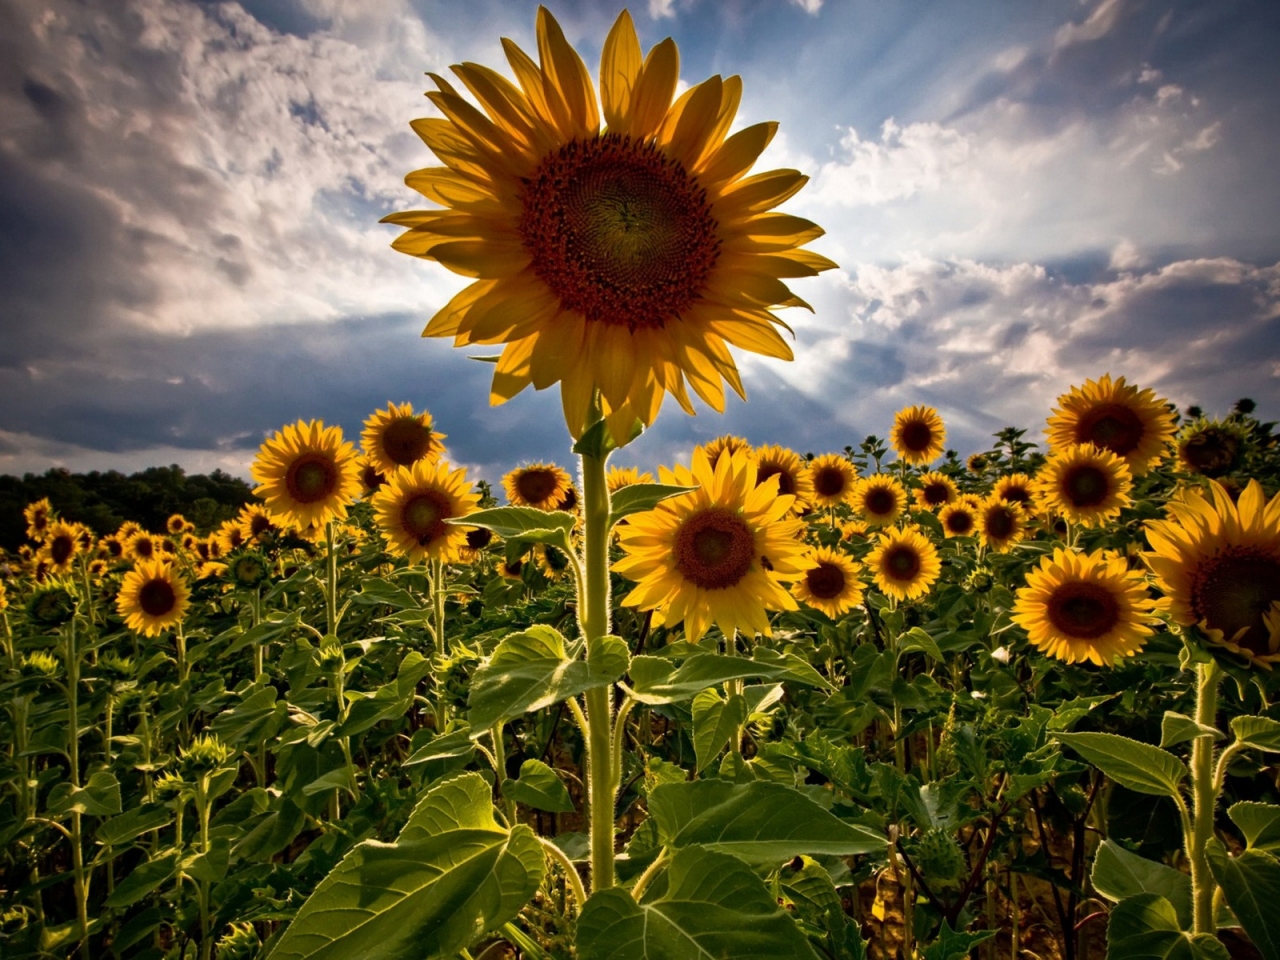 HDR Sunflower for 1280 x 960 resolution